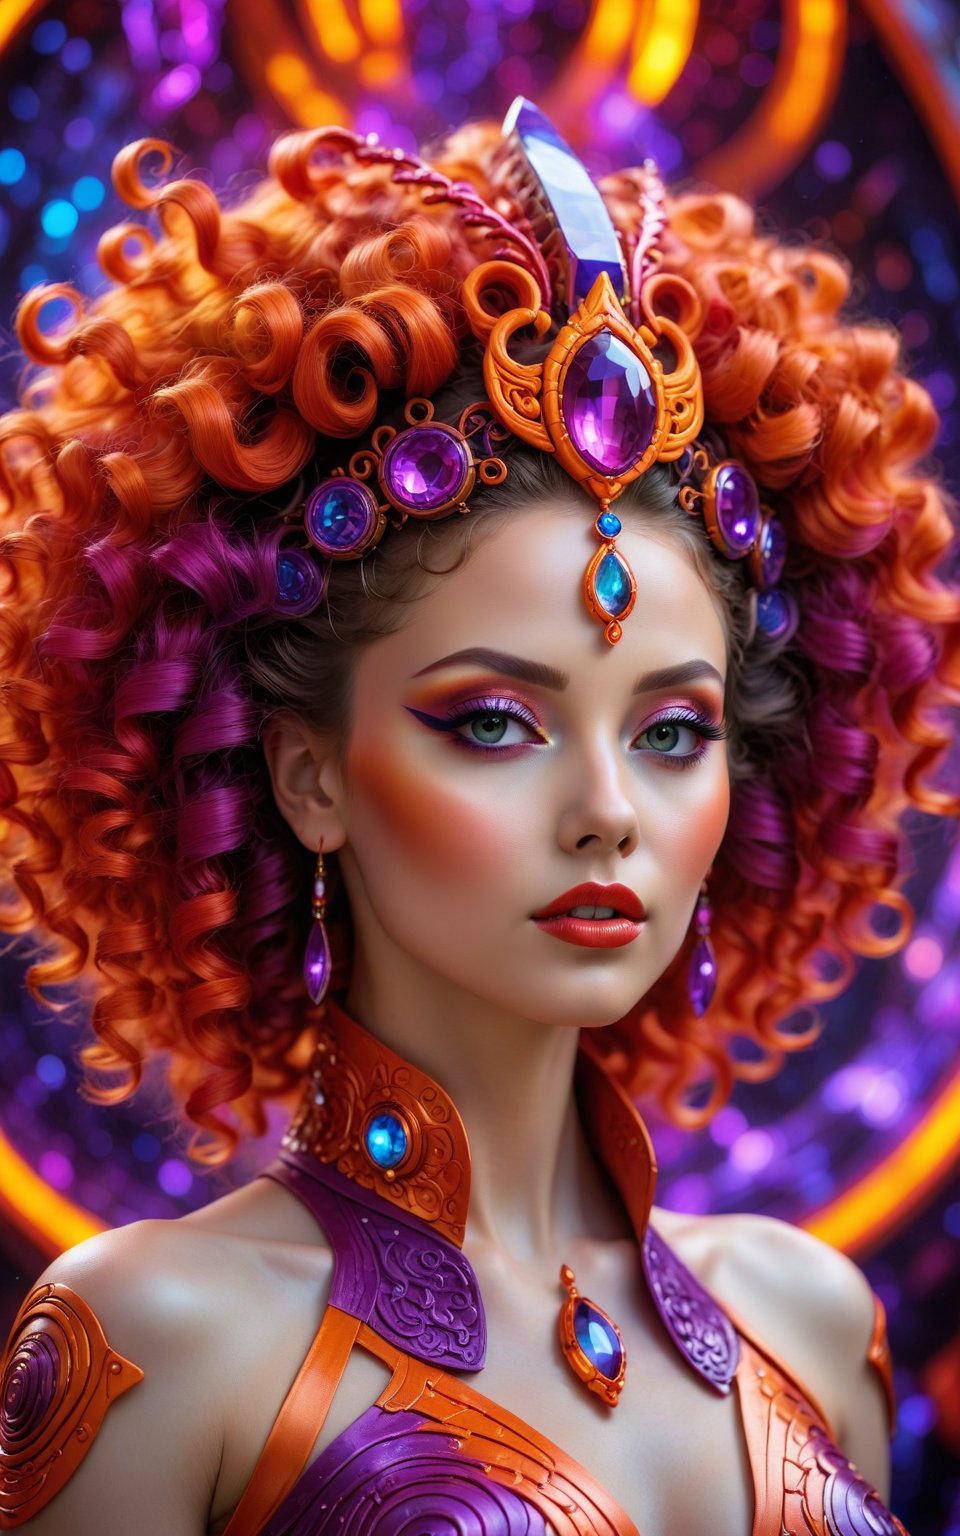 (best quality,8K,highres,masterpiece), ultra-detailed, (portrait of a woman with intricate, vibrant hair and a futuristic, ethereal style), portrayal of a woman with mesmerizing, colorful curls in shades of orange, red, and purple. She wears a headpiece with a glowing central gem. The background is an intricate pattern of swirling designs, emphasizing a futuristic and surreal aesthetic. The woman's expression is serene and captivating, with detailed facial features and a focus on her striking hair and adornments.